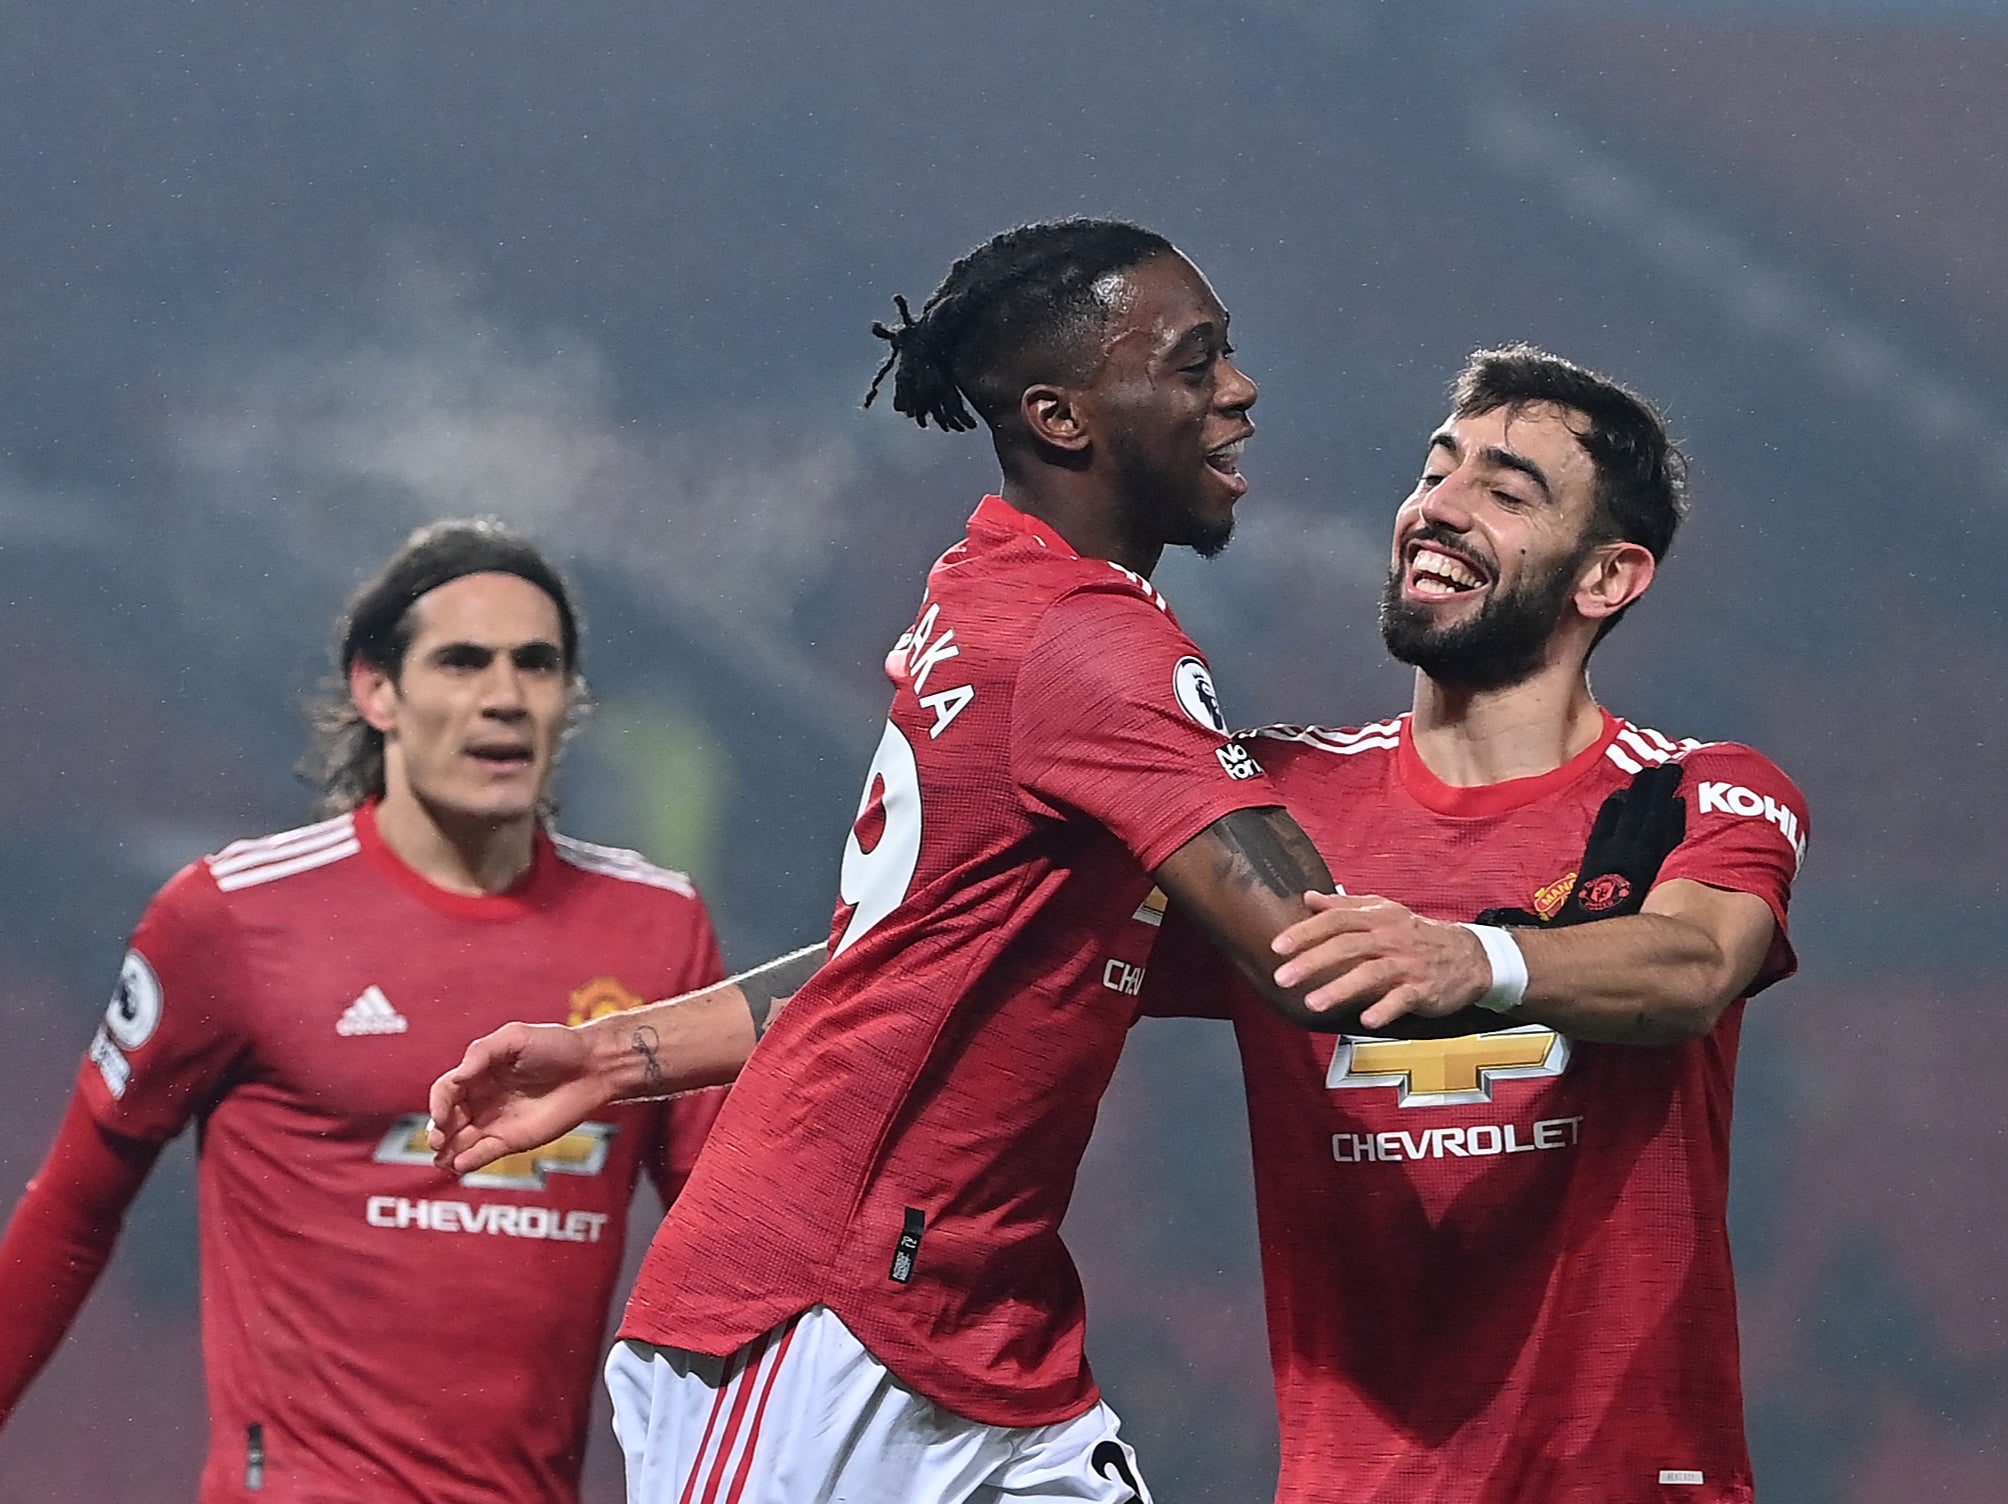 Wan-Bissaka’s defensive talent has earned him high praise so far in his career